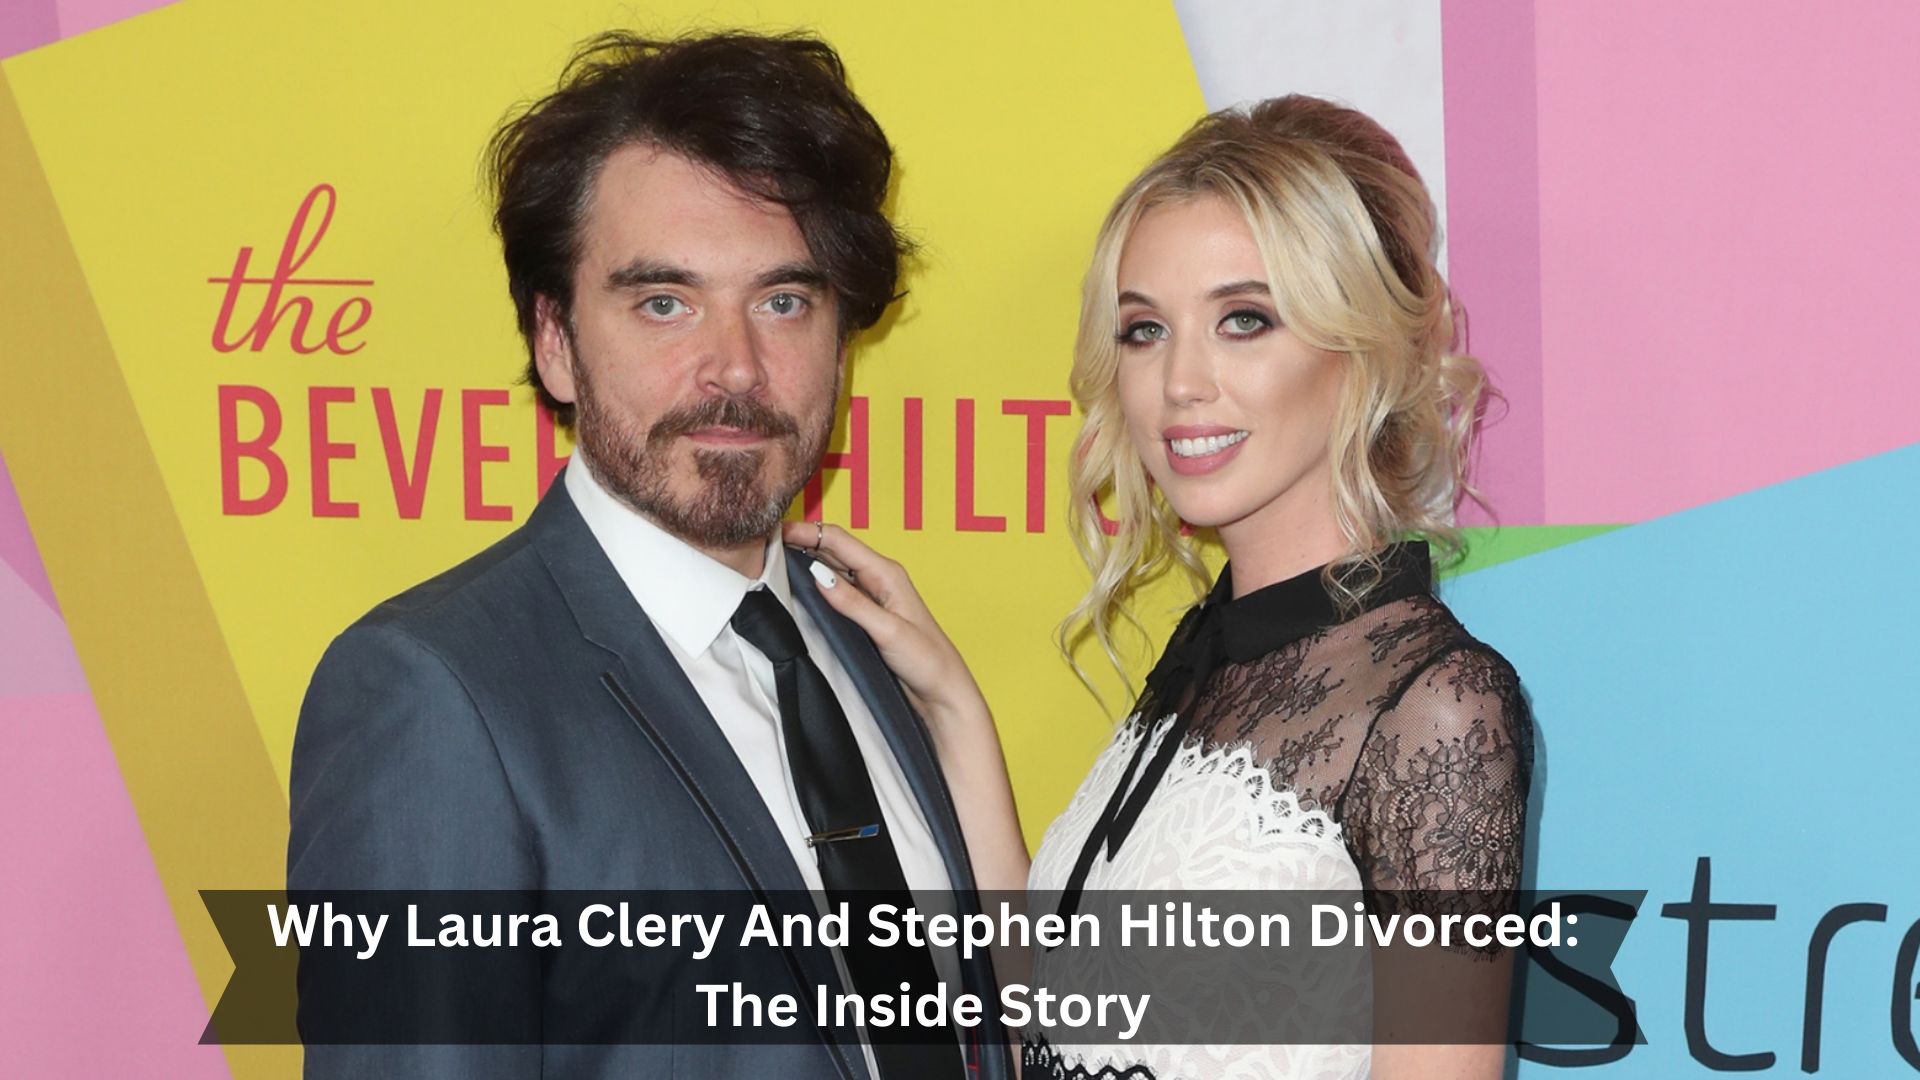 Why-Laura-Clery-And-Stephen-Hilton-Divorced-The-Inside-Story